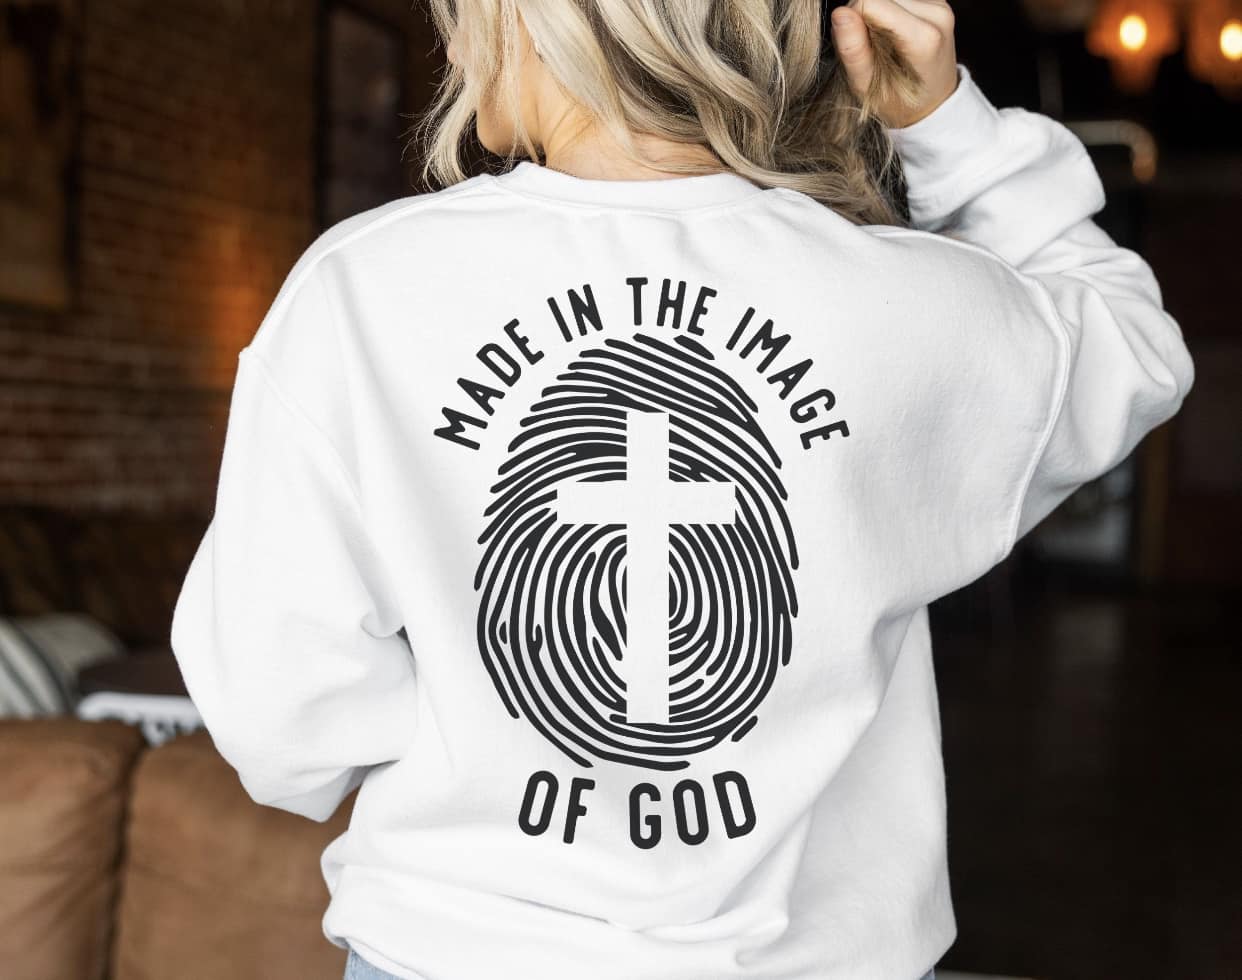 Made in the image of God (RTS 2/17)